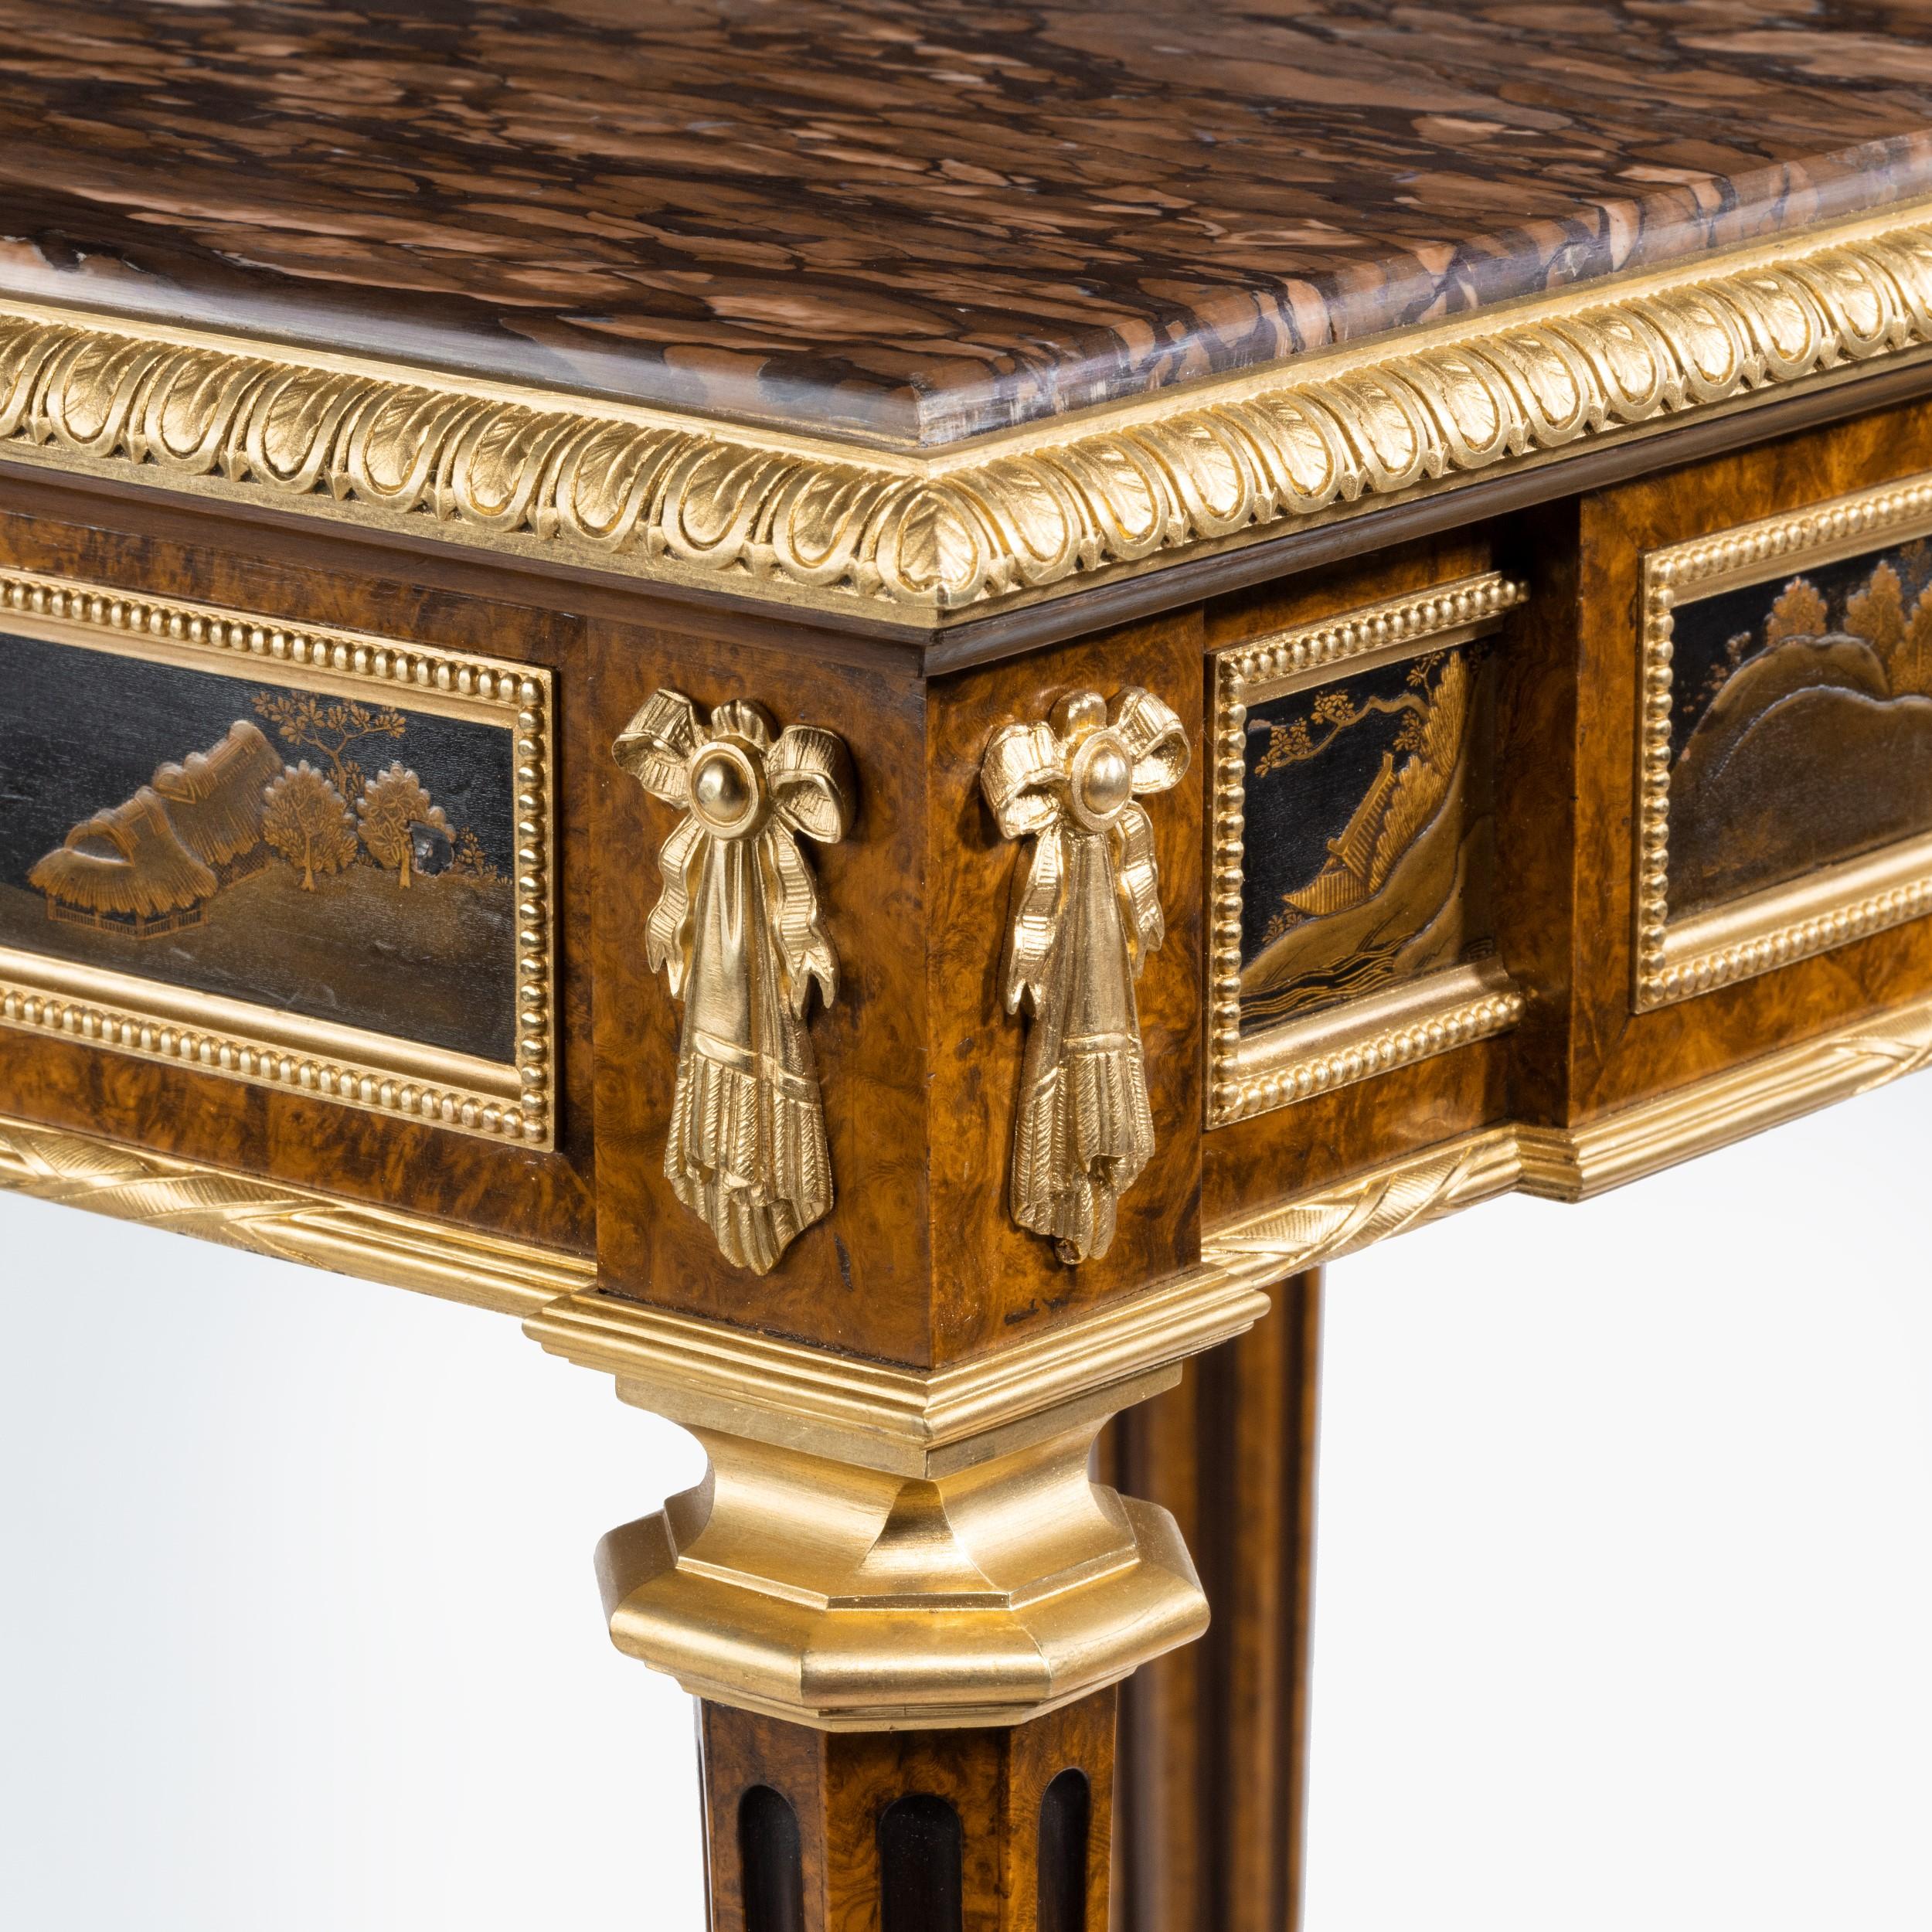 Bronze Antique Ormolu-Mounted Side Table in the Louis XVI Manner by Henry Dasson